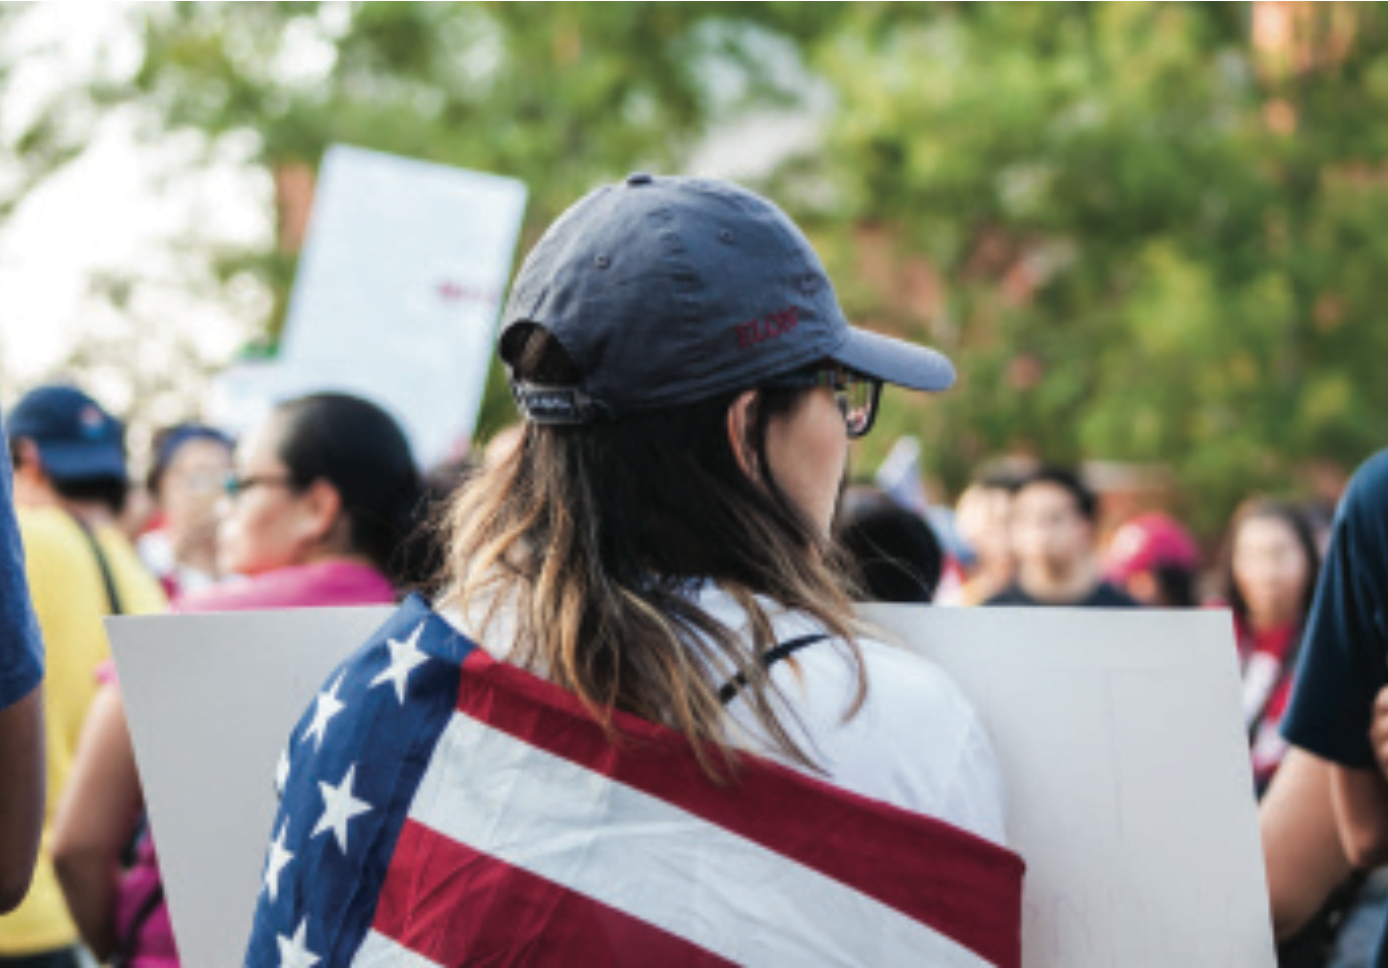 Chrisitina Gallegos, first-year student at Elon university, marched through downtown Greensboro wrapped in the United States flag to stand in solidarity with DACA receipients.// Photo by Fernando Jimenez/The Guilfordian